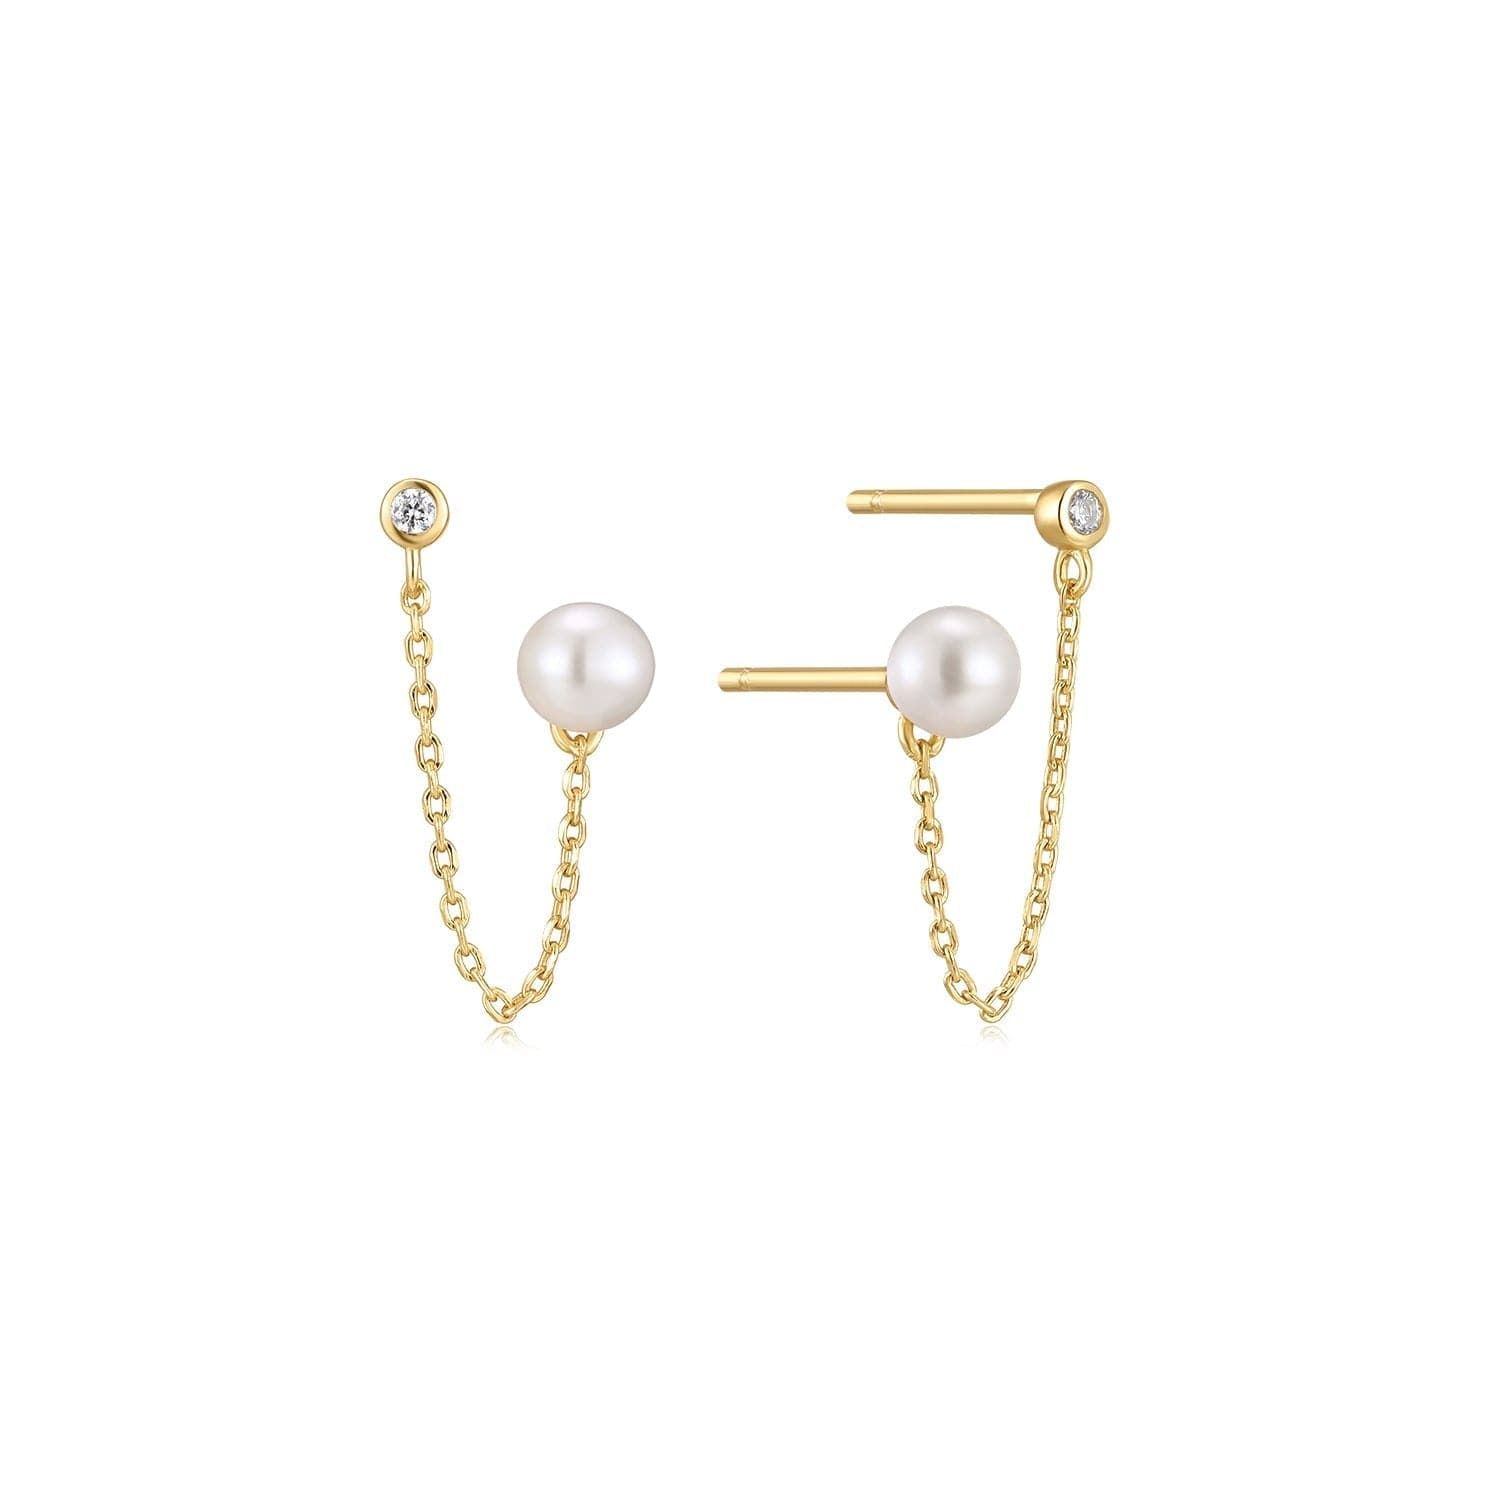 a pair of earrings with pearls and a chain